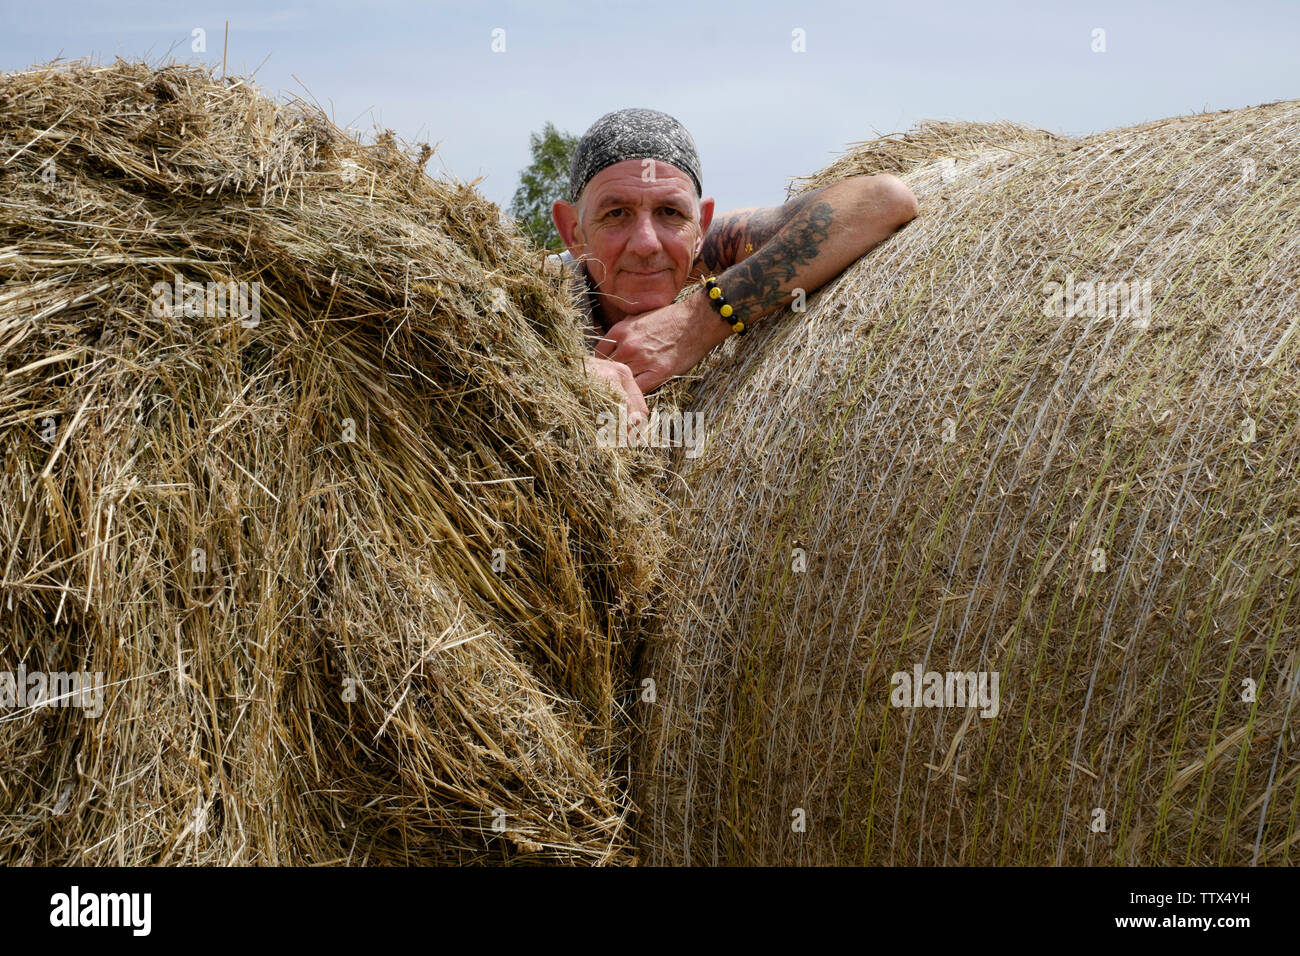 man standing amongst round hay bales while enjoying the hot summer sun in a rural area of zala county hungary Stock Photo